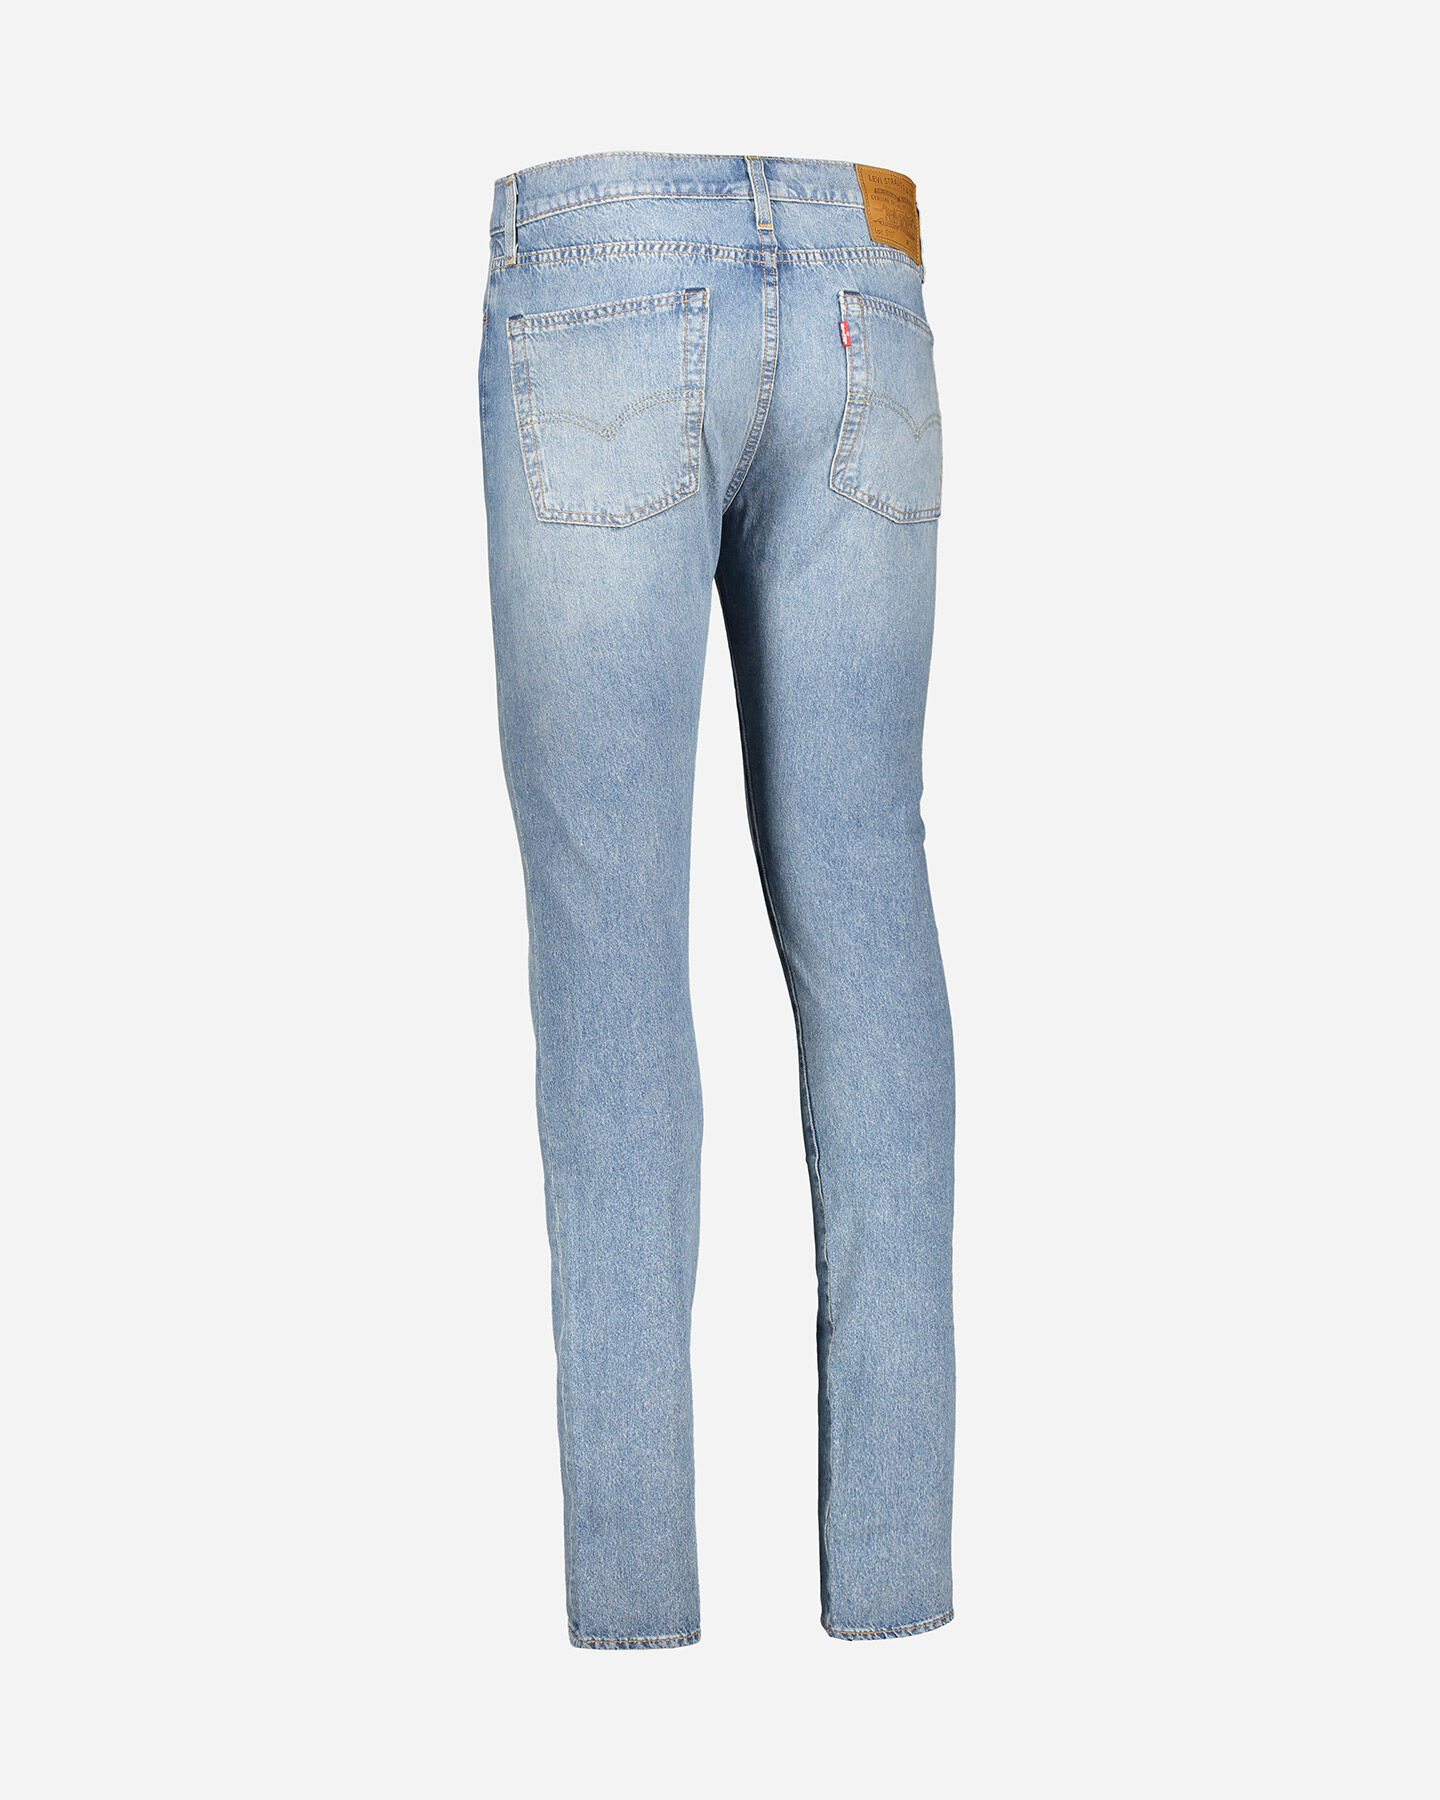  Jeans LEVI'S 510 SKINNY M S4076911|1051|30 scatto 5